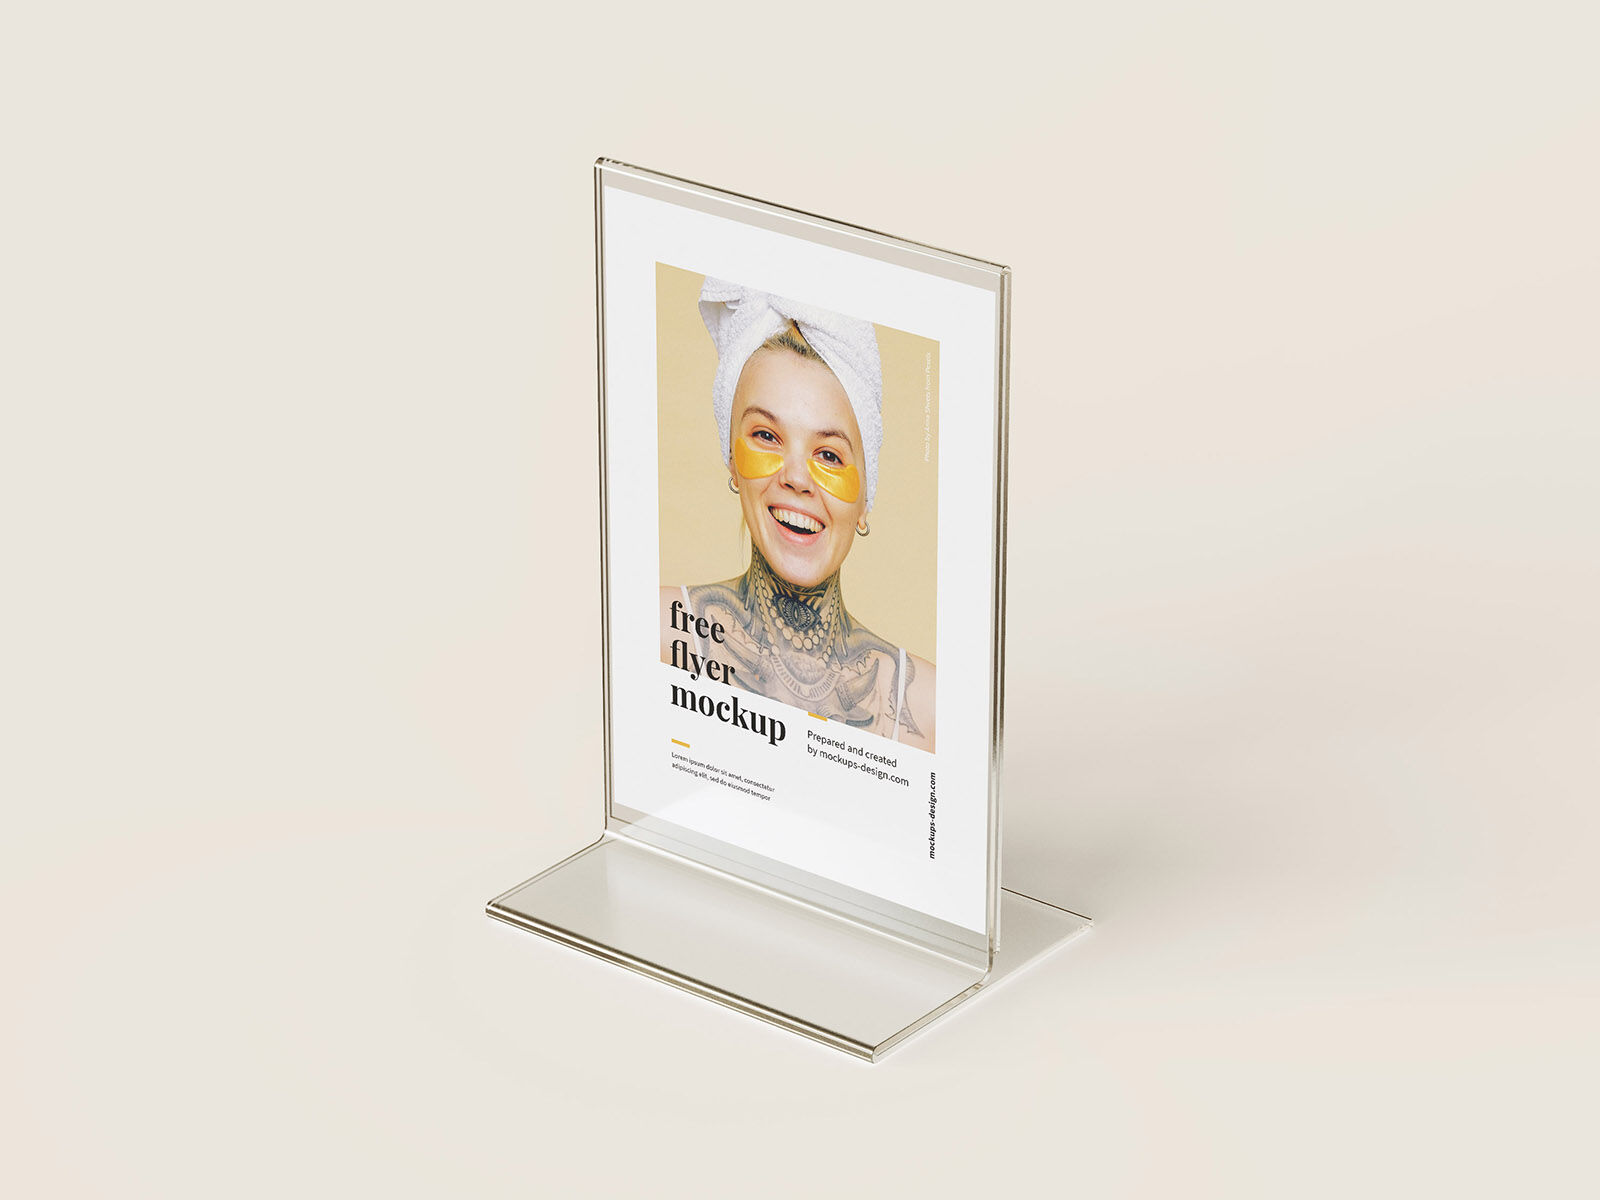 3 Flyer Stand Mockups in Different Angles FREE PSD